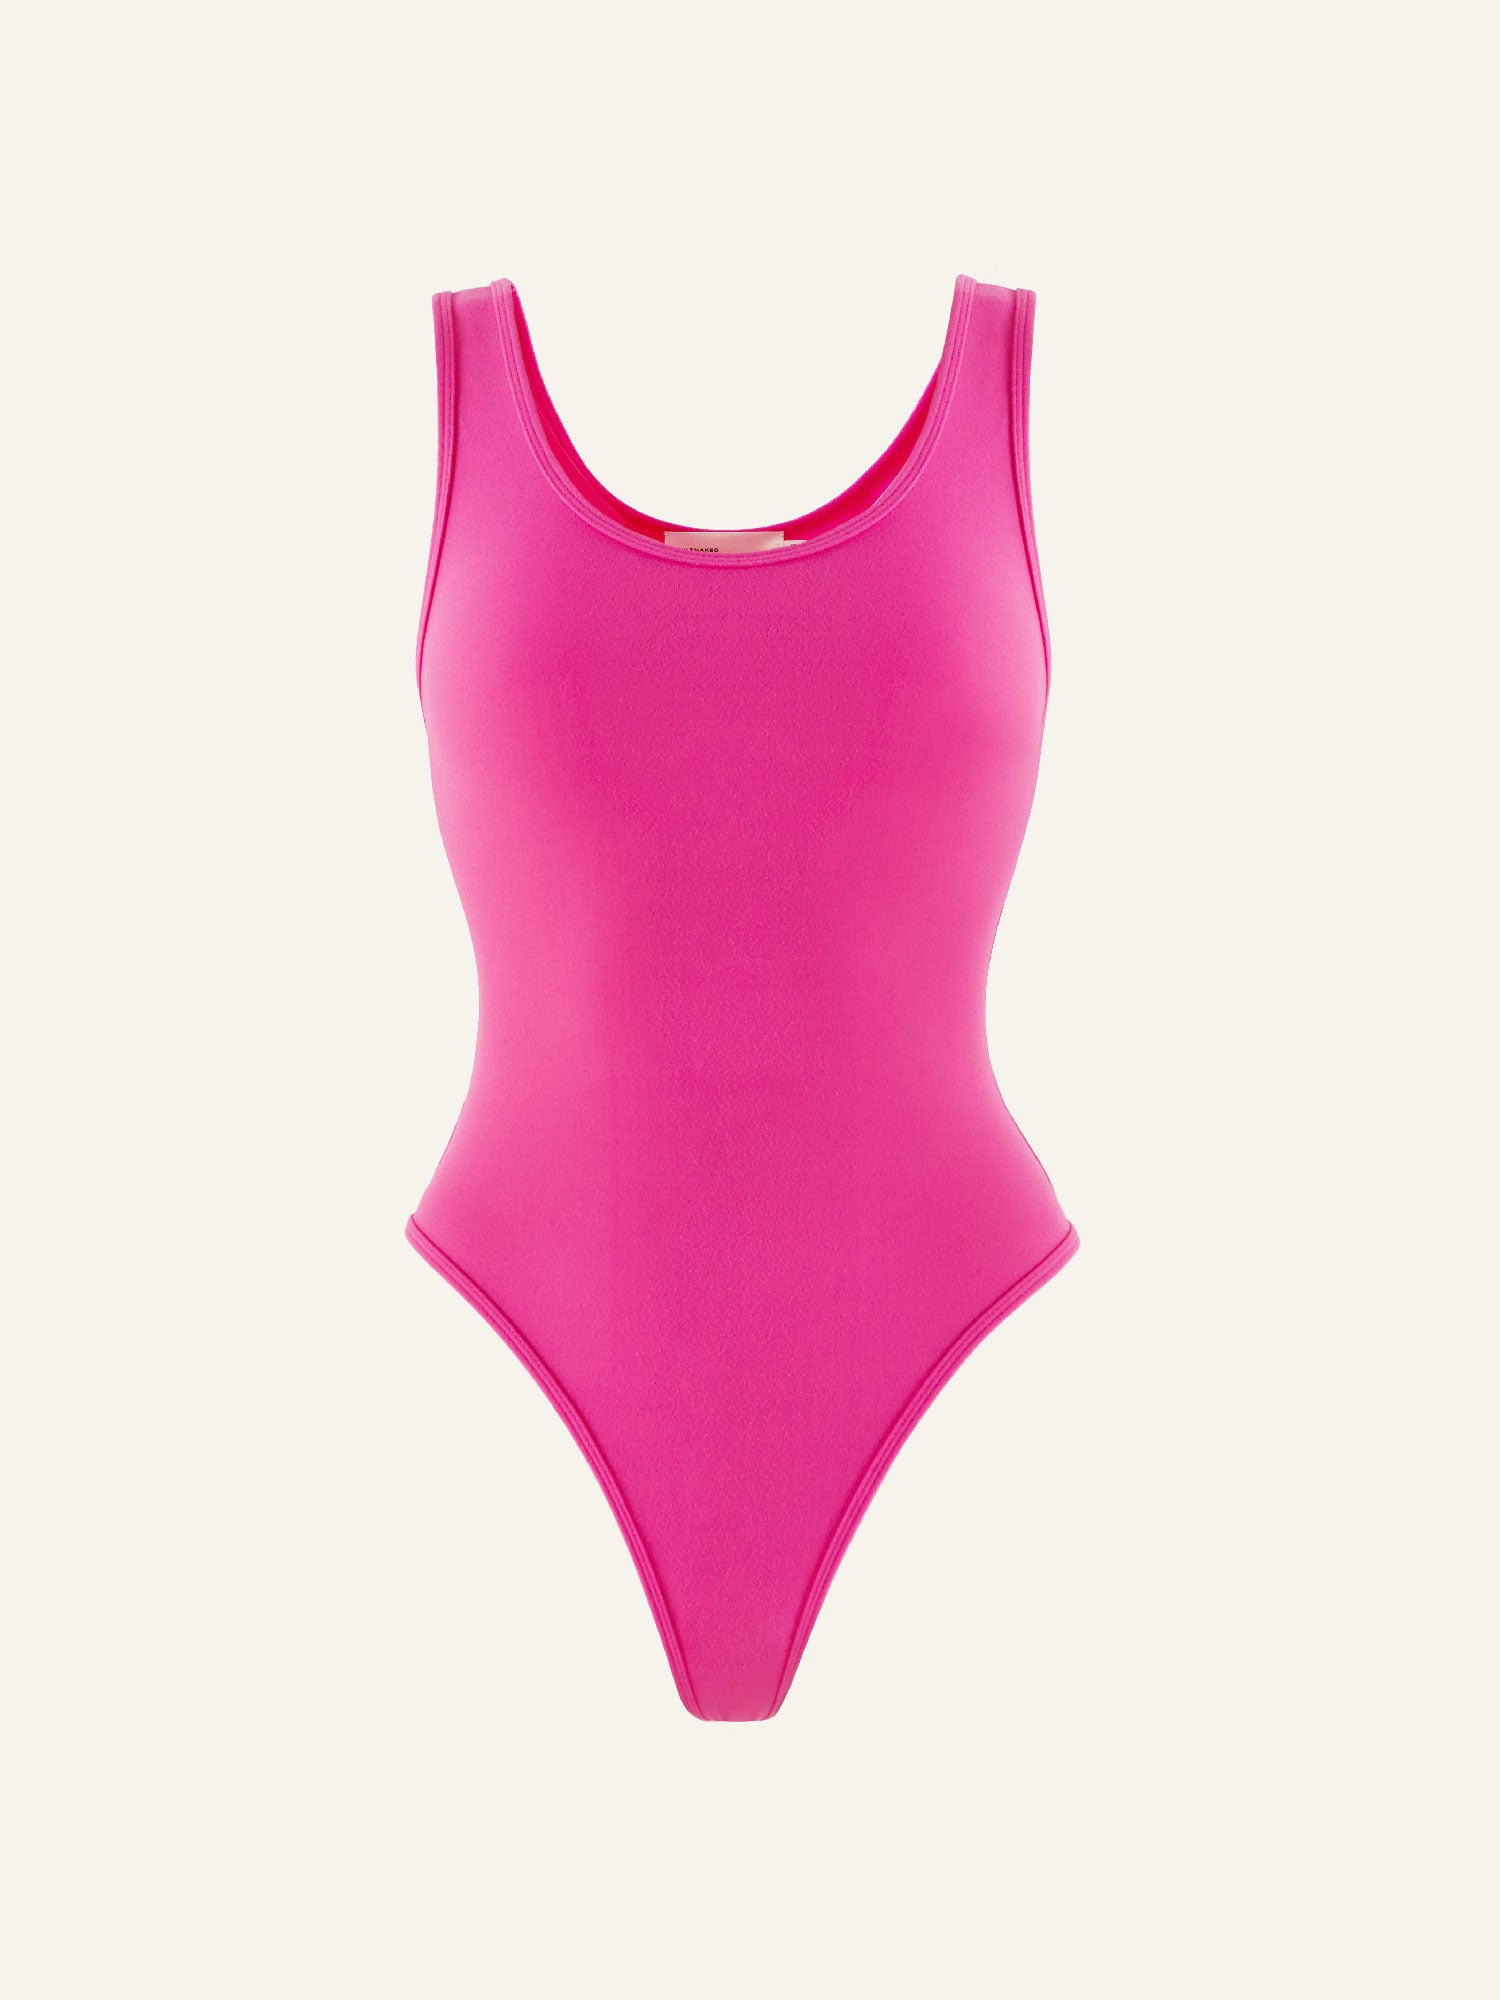 Product photo of a pink sleeveless bodysuit